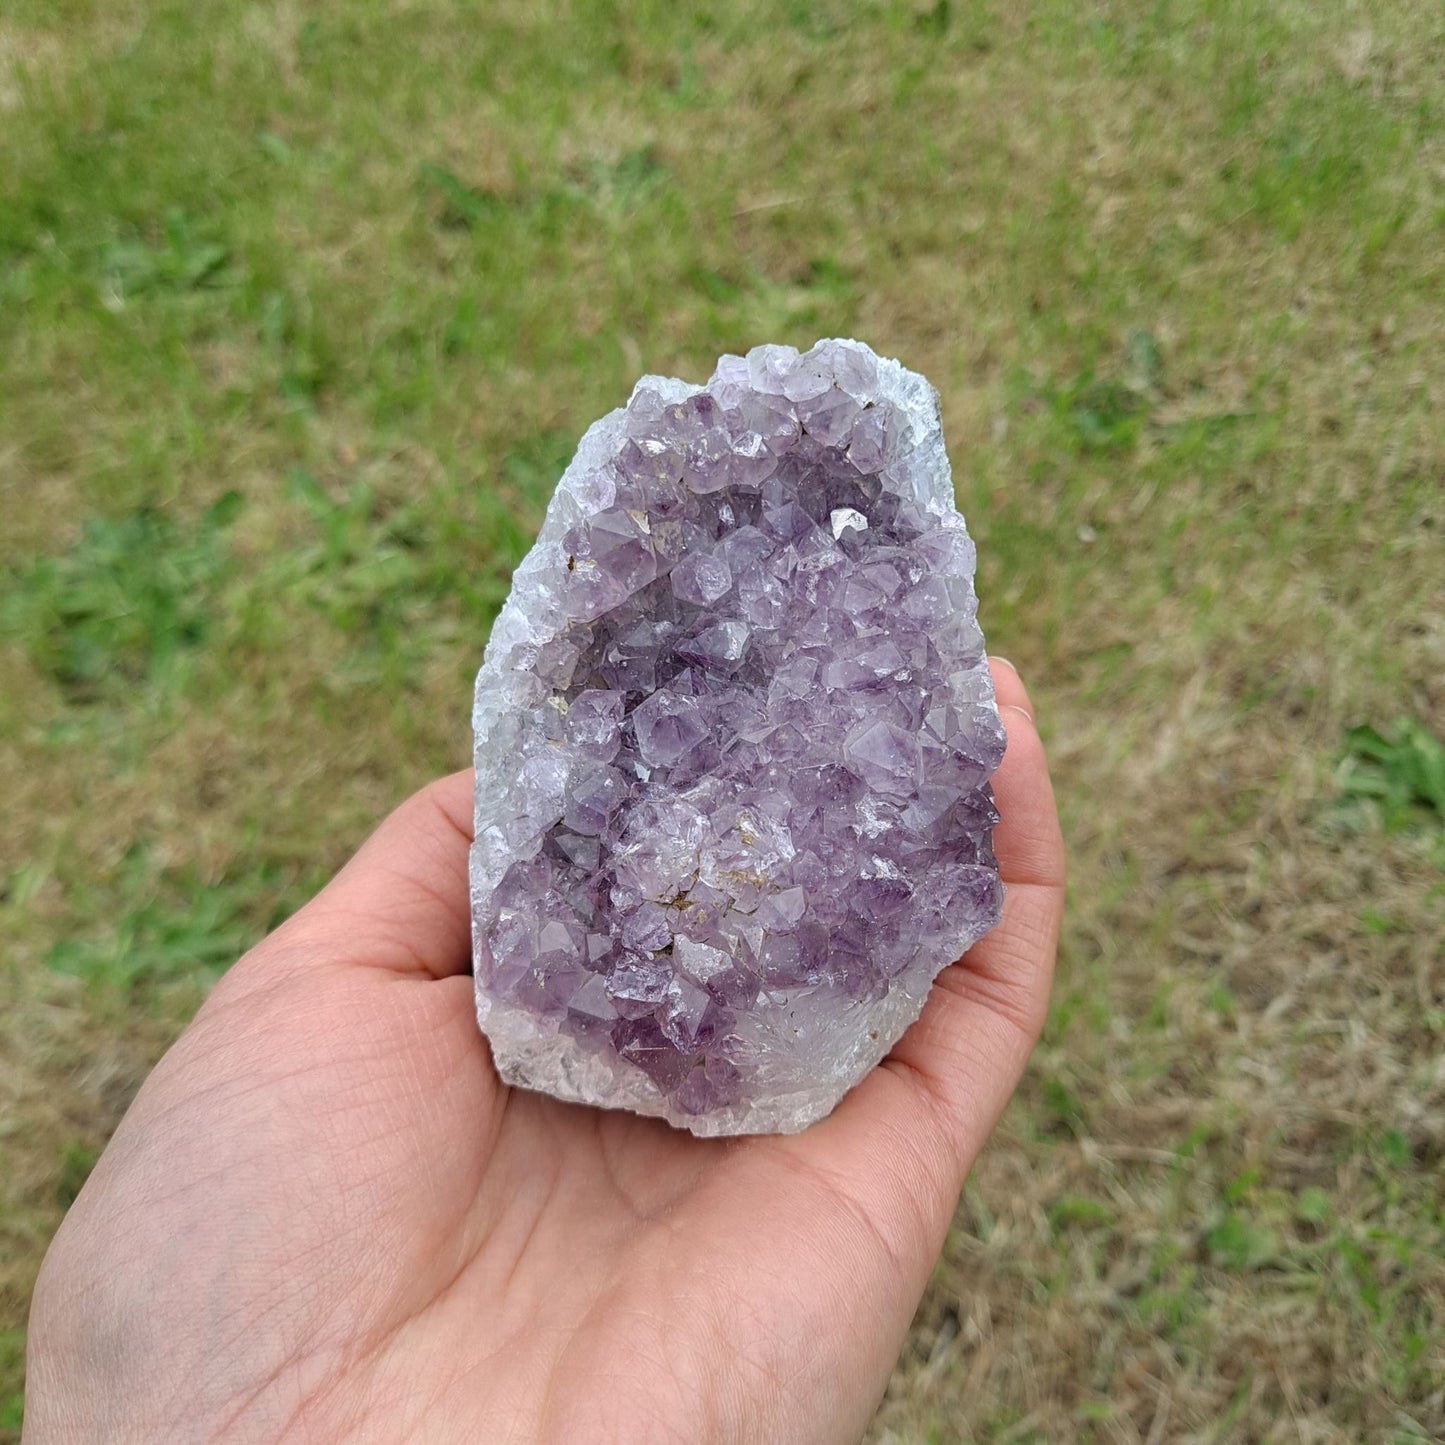 Dumi's Crystals | Lavender Amethyst Cluster (8.9 x 6.3 x 6.3cm) | A Lavender Amethyst Cluster displayed in a living room, radiating a calming energy and creating a tranquil space. This crystal is believed to enhance intuition and spiritual awareness.